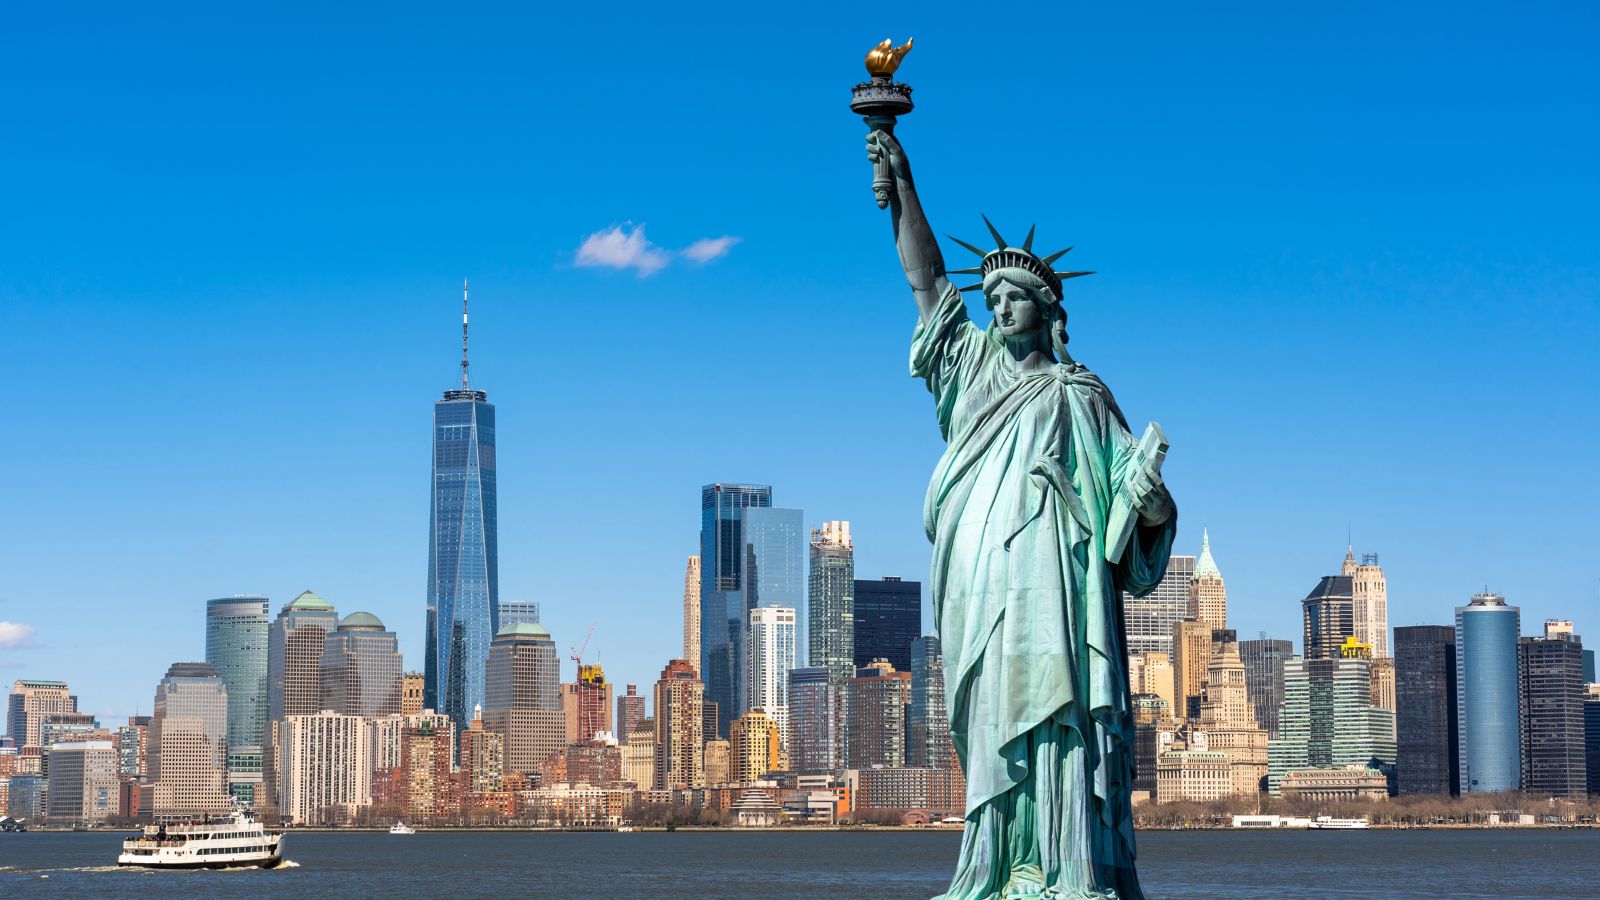 <p>Recommended by 65% of visitors</p><p>The Statue of Liberty, a symbol of freedom and democracy, stands majestically in New York Harbor. Designed by Frederic Bartholdi and Alexandre Eiffel, it was dedicated in 1886 after overcoming numerous challenges. Visitors can admire it from various city points or opt for a closer look with grounds, pedestal, or crown tickets. A sightseeing tour offers a comprehensive experience, including a visit to Ellis Island.</p>